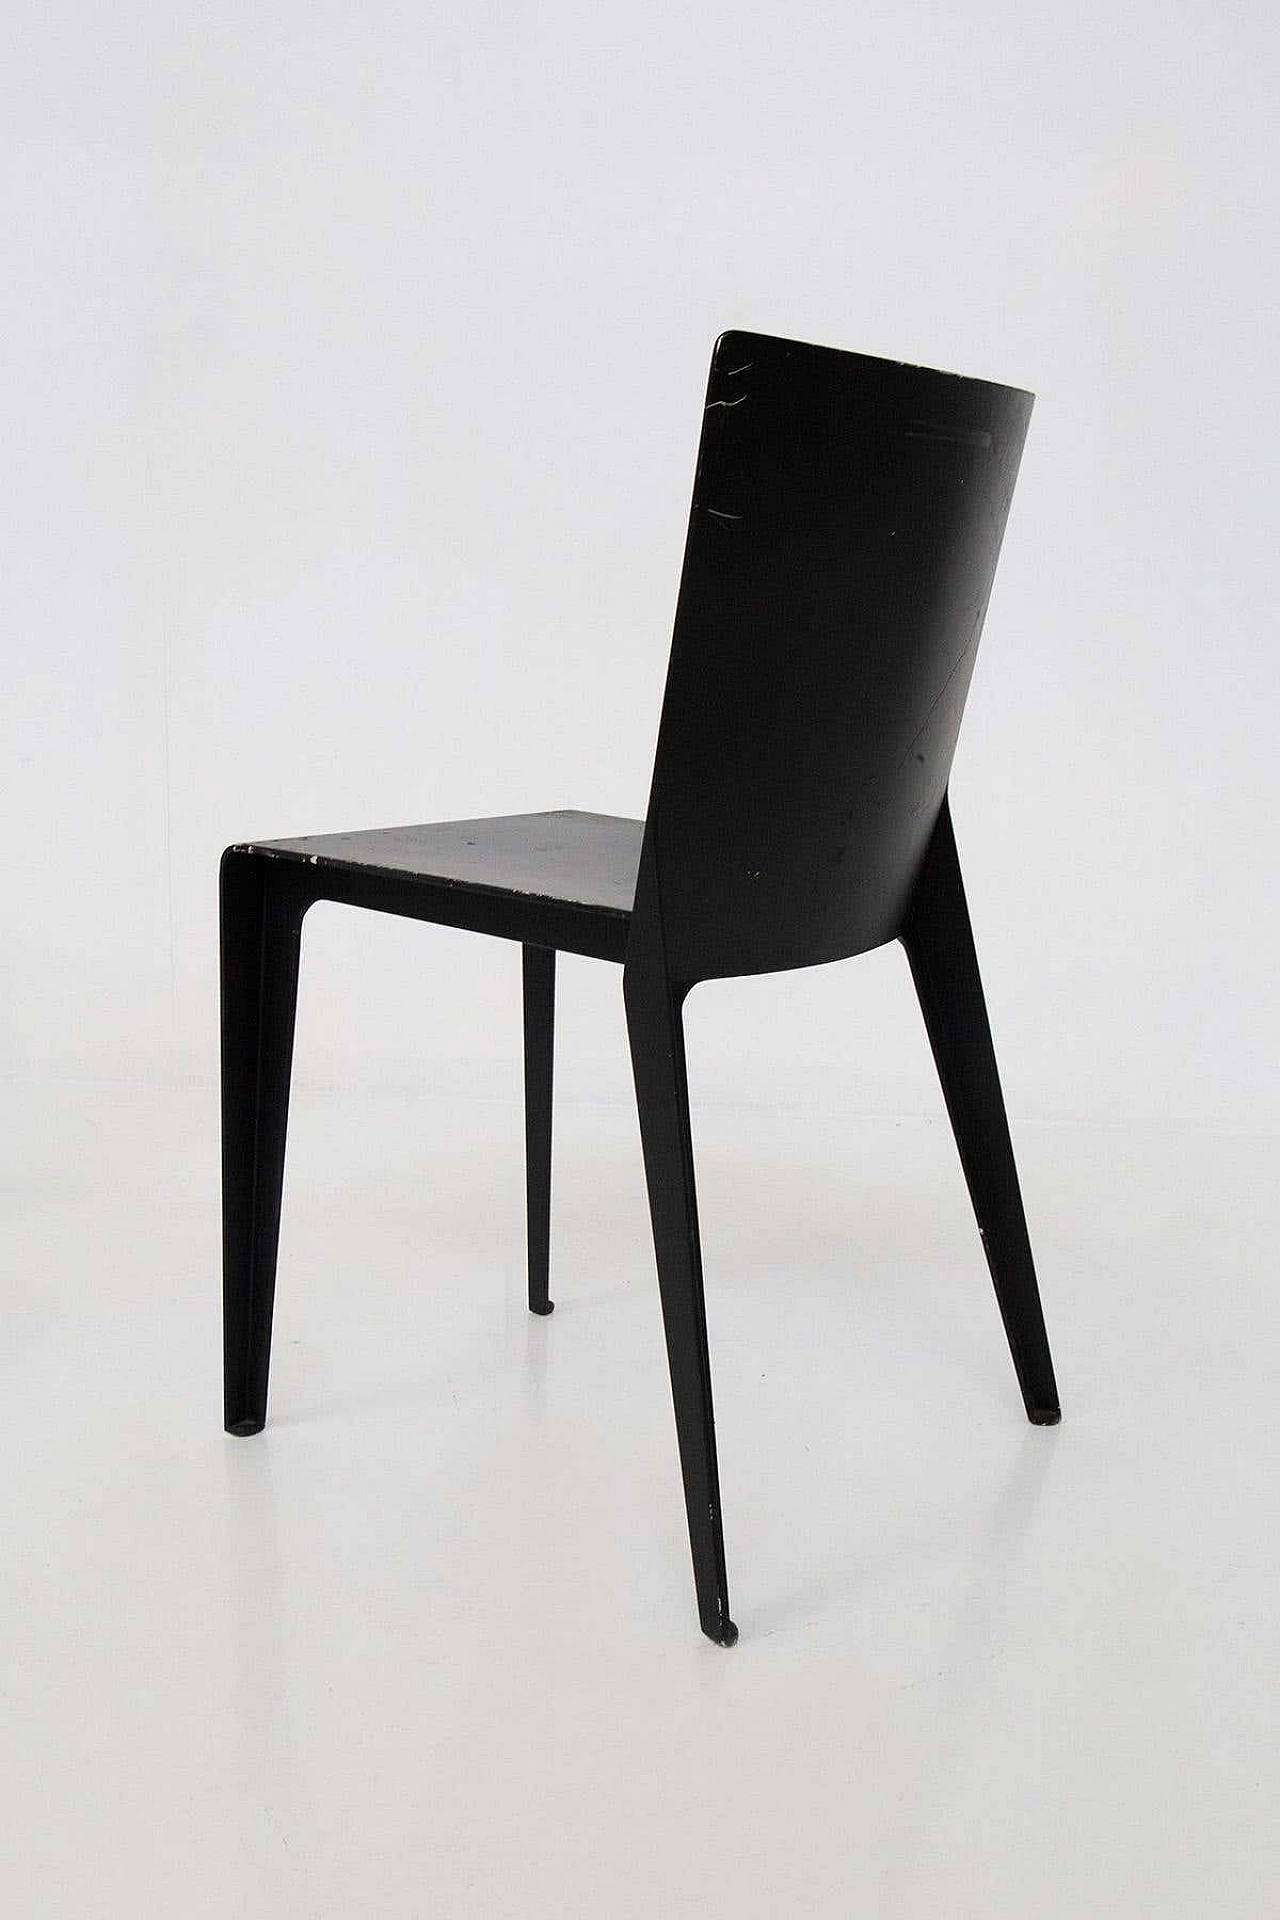 5 Alfa chairs by Hannes Wettstein for Molteni, 2001 9